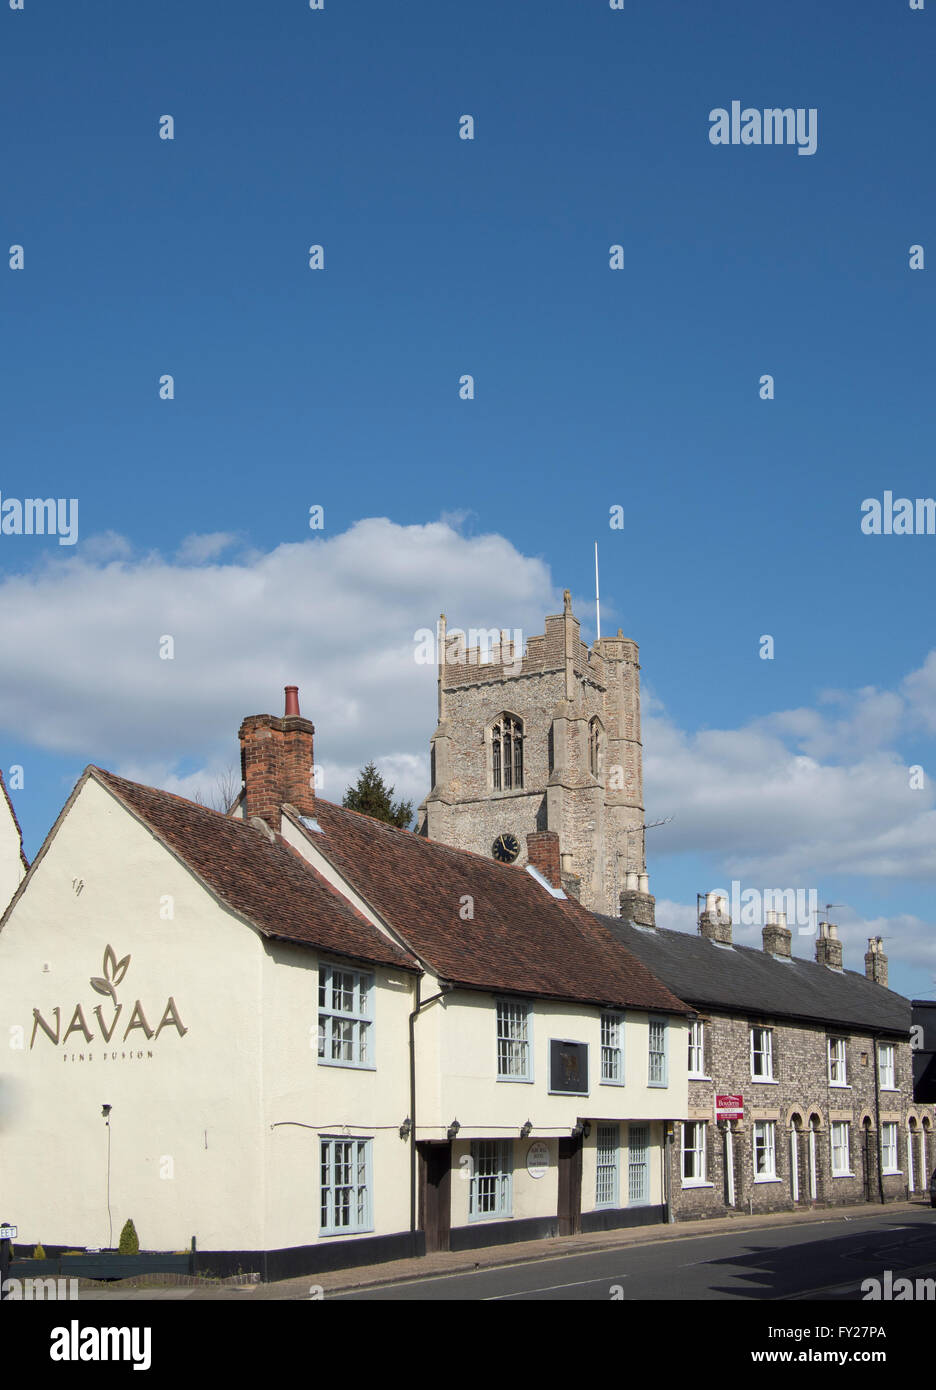 A view of old building and houses, with All St Church behind, in Church Street, Sudbury, Suffolk Stock Photo